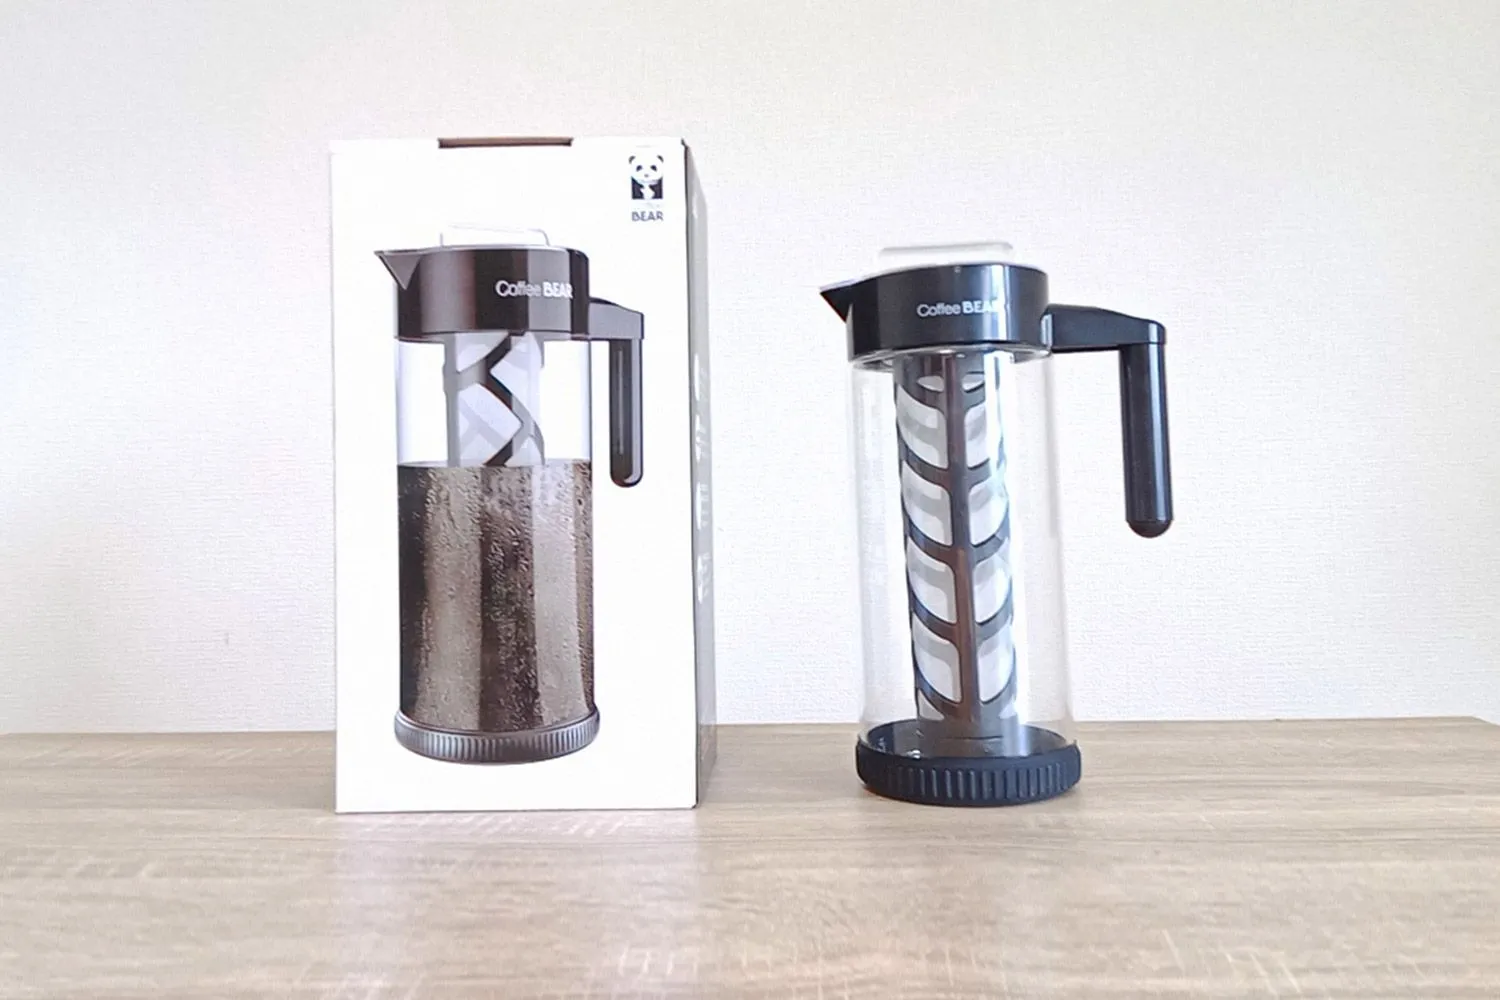 Coffee Bear Cold Brew Coffee Maker In-depth Review